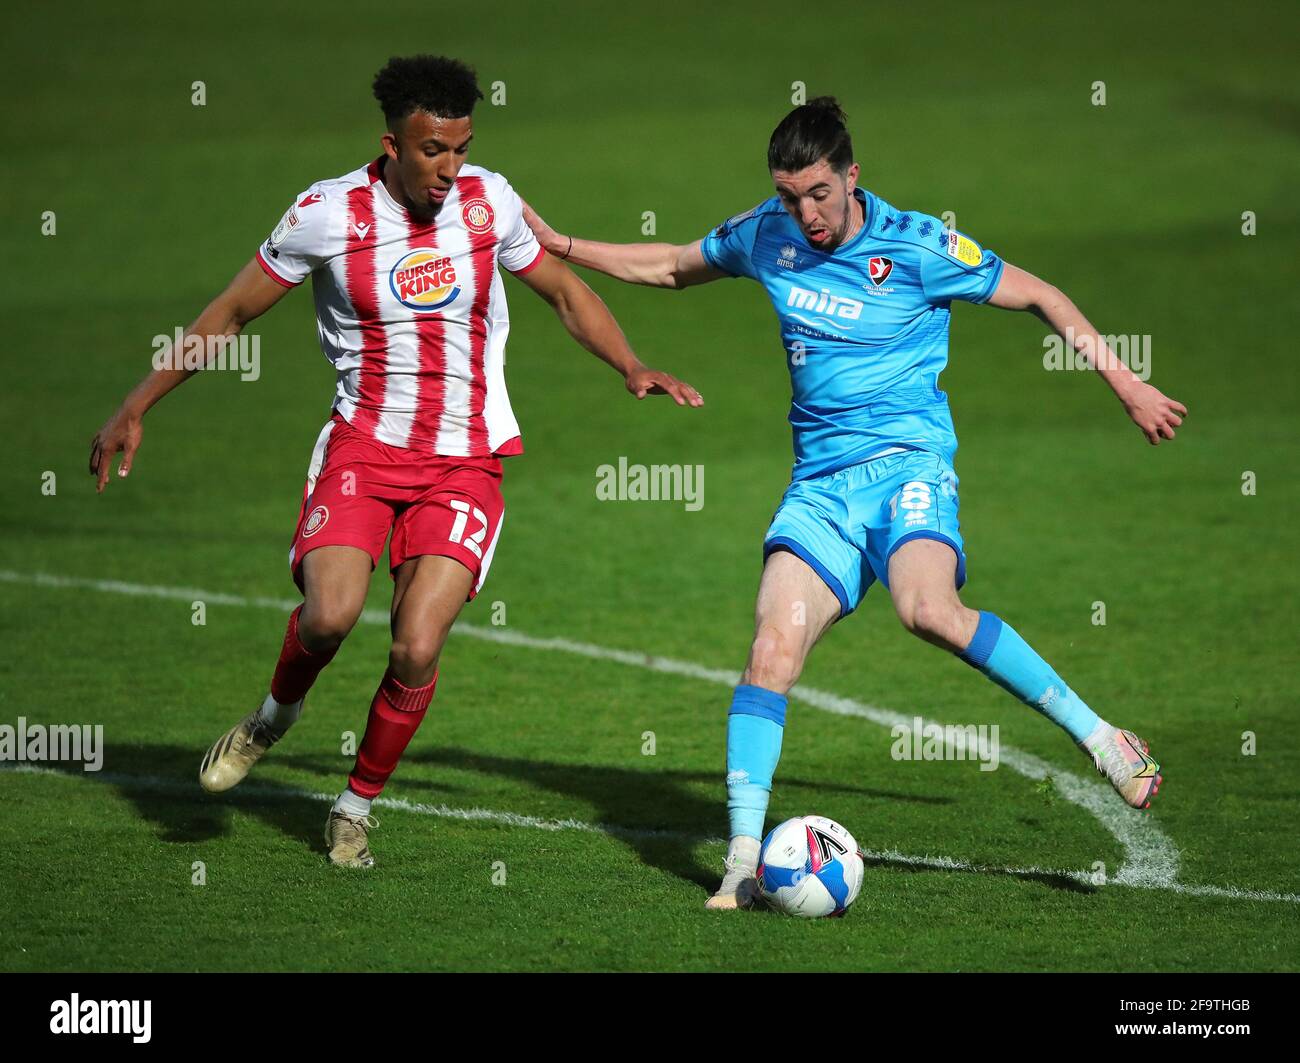 Stevenage's Remeao Hutton (left) and Cheltenham Town's Finn Azaz battle for the ball during the Sky Bet League Two match at the Lamex Stadium, Stevenage. Picture date: Tuesday April 20, 2021. Stock Photo